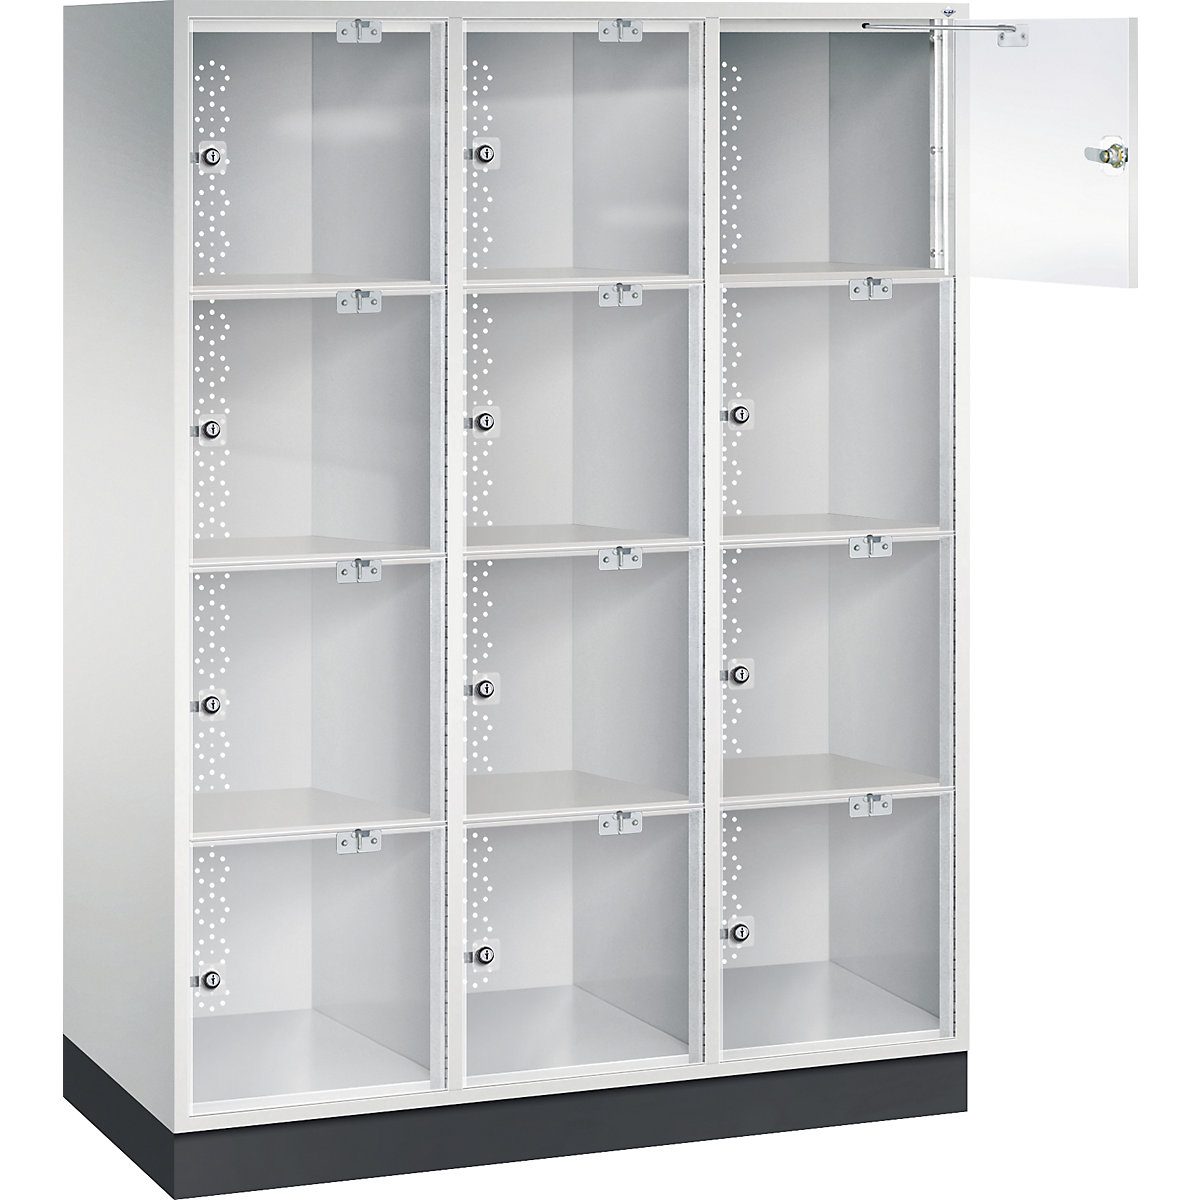 INTRO steel compartment locker with acrylic glass door – C+P (Product illustration 5)